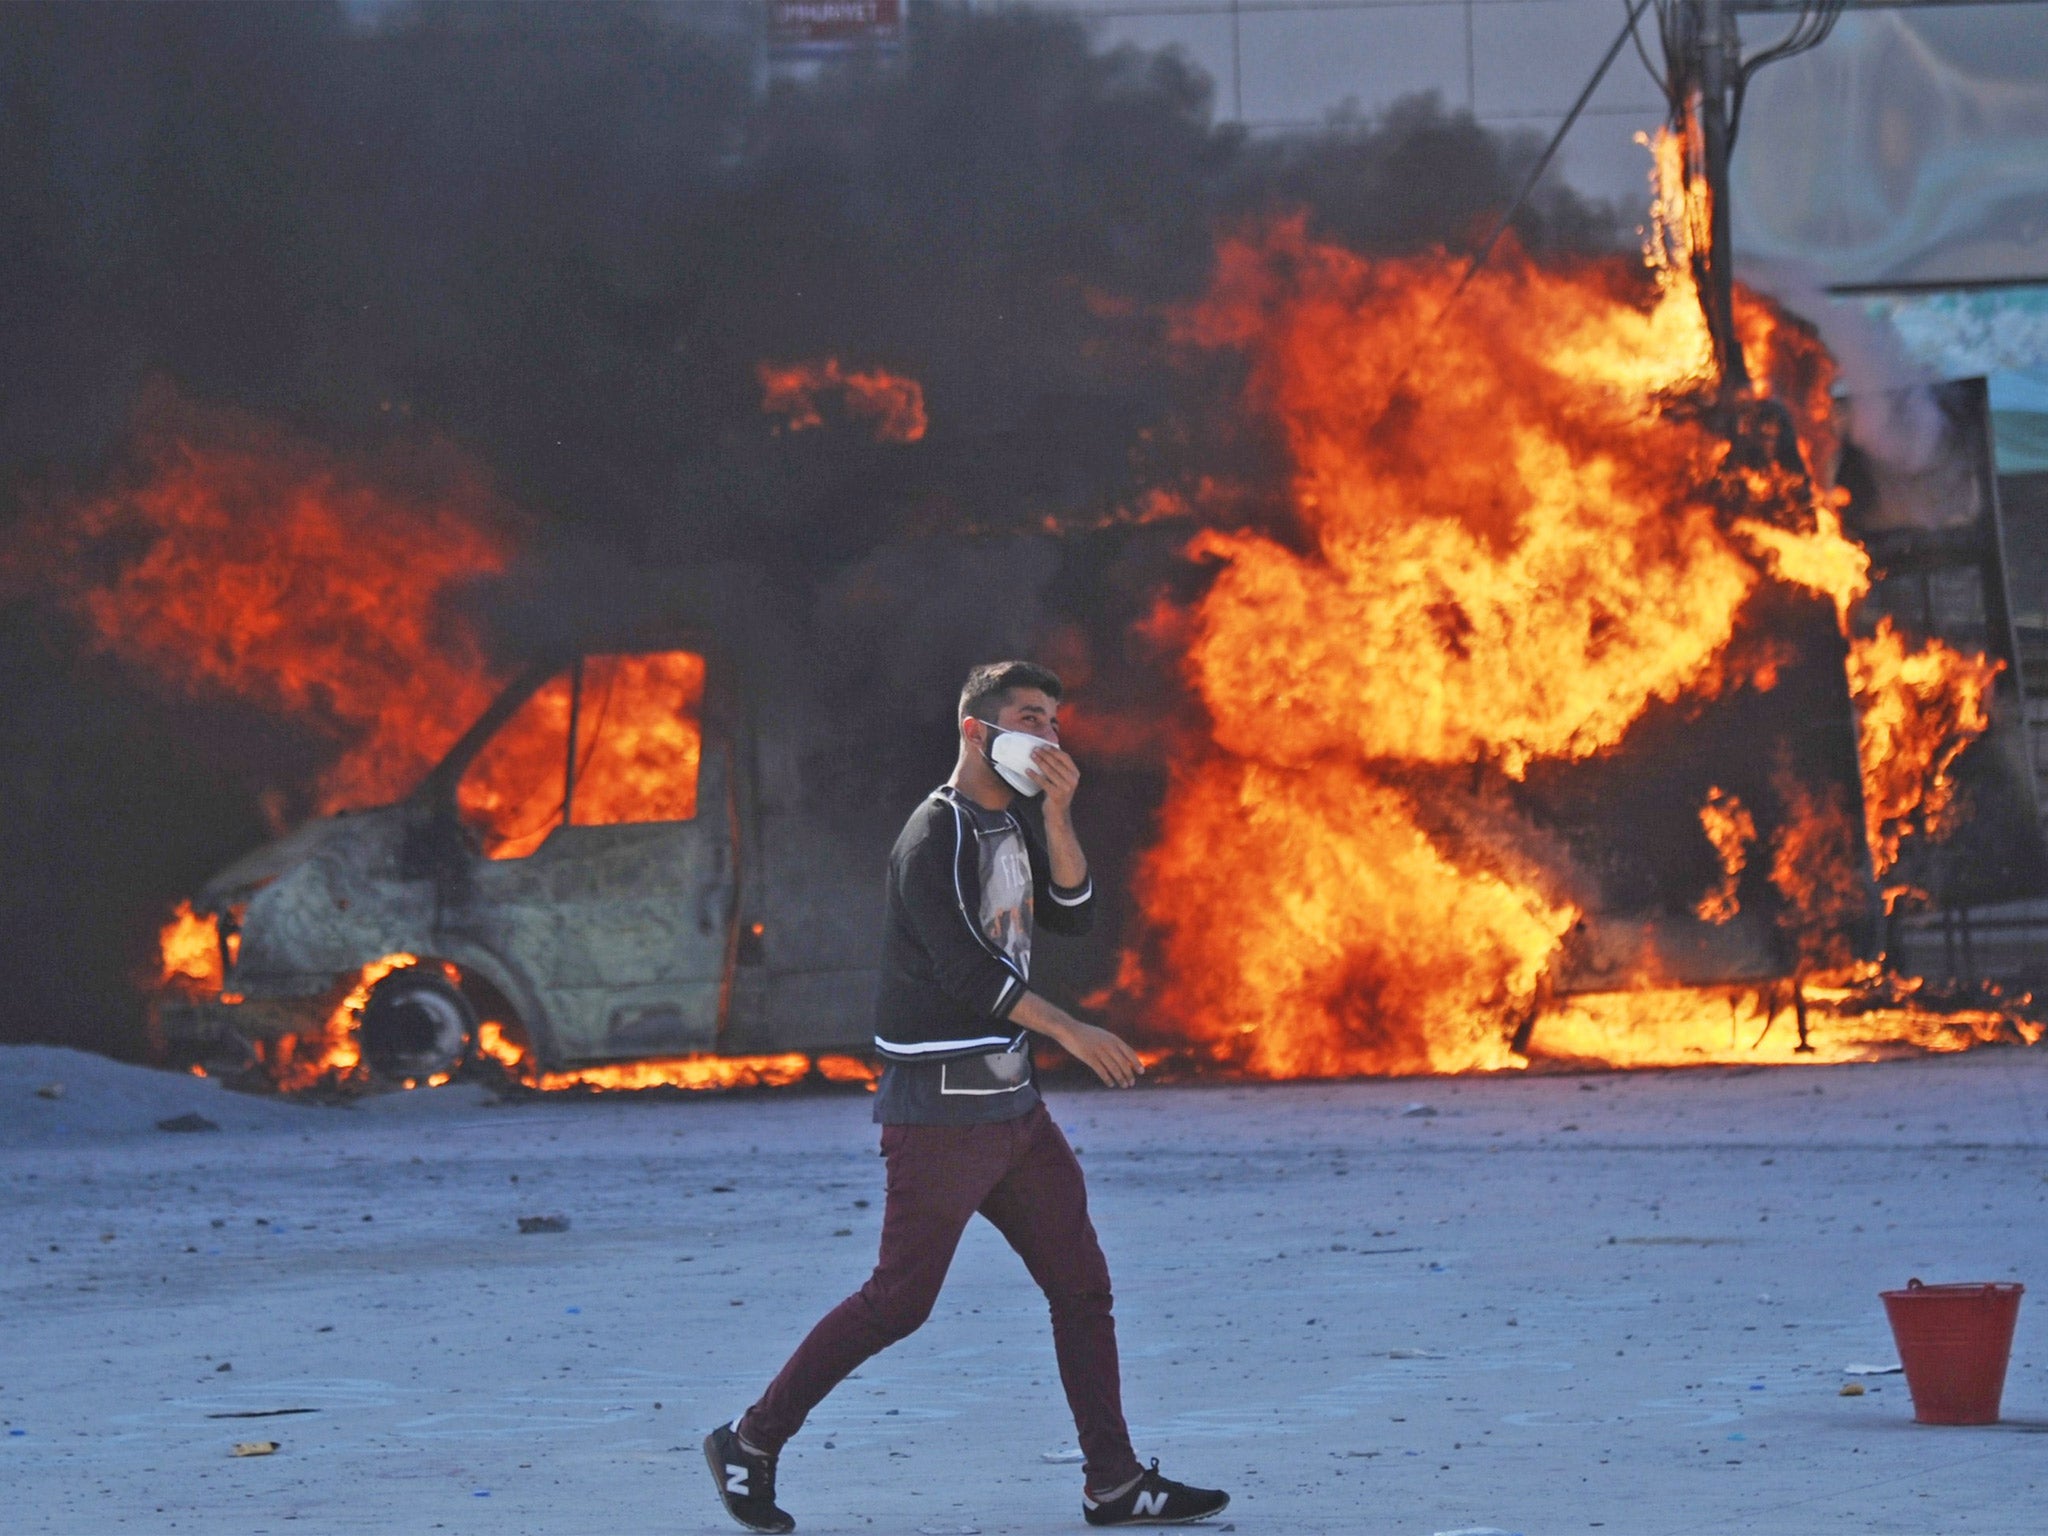 A man walks in front of a burning car during clashes with police on Taksim square